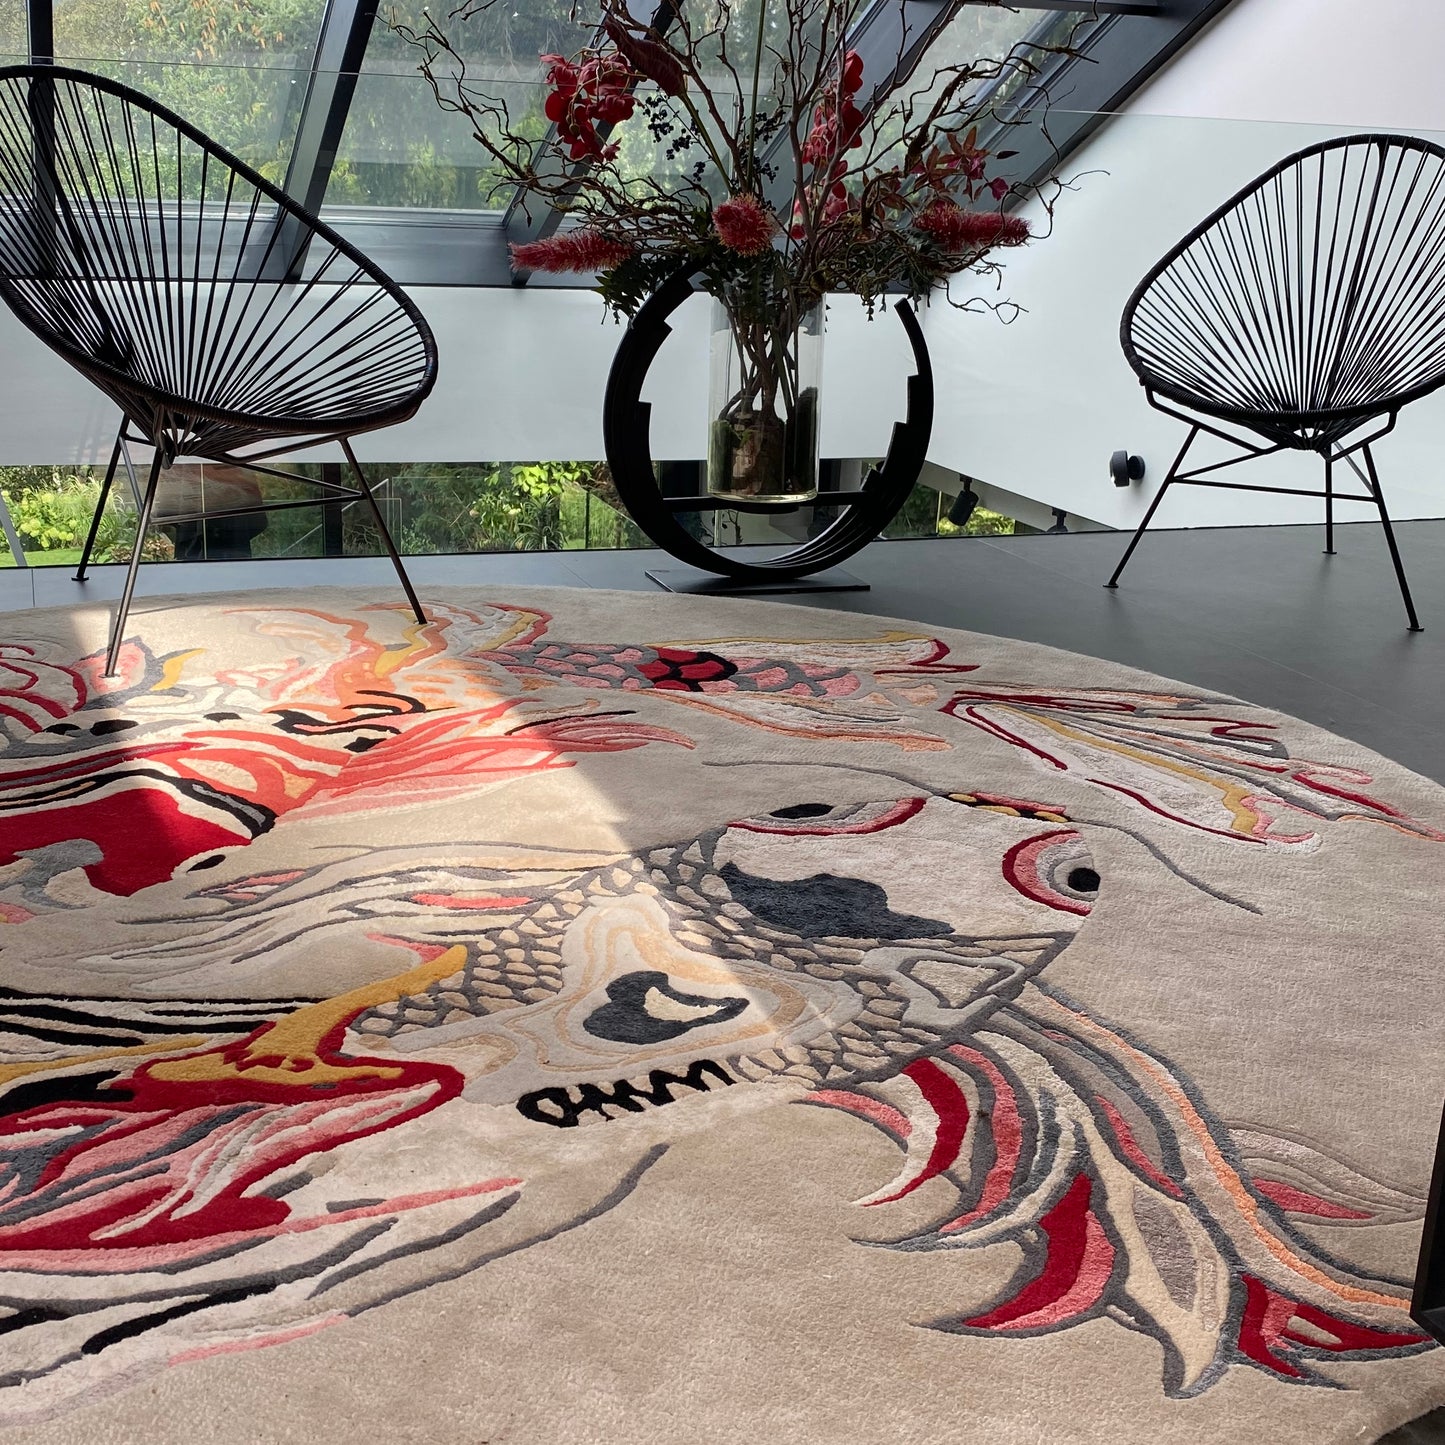 KOIS IN THE LOVE POND 1 - Unique Designer Rug 260 cm - Hand-knotted in Nepal - Knotting time approx. 270 days